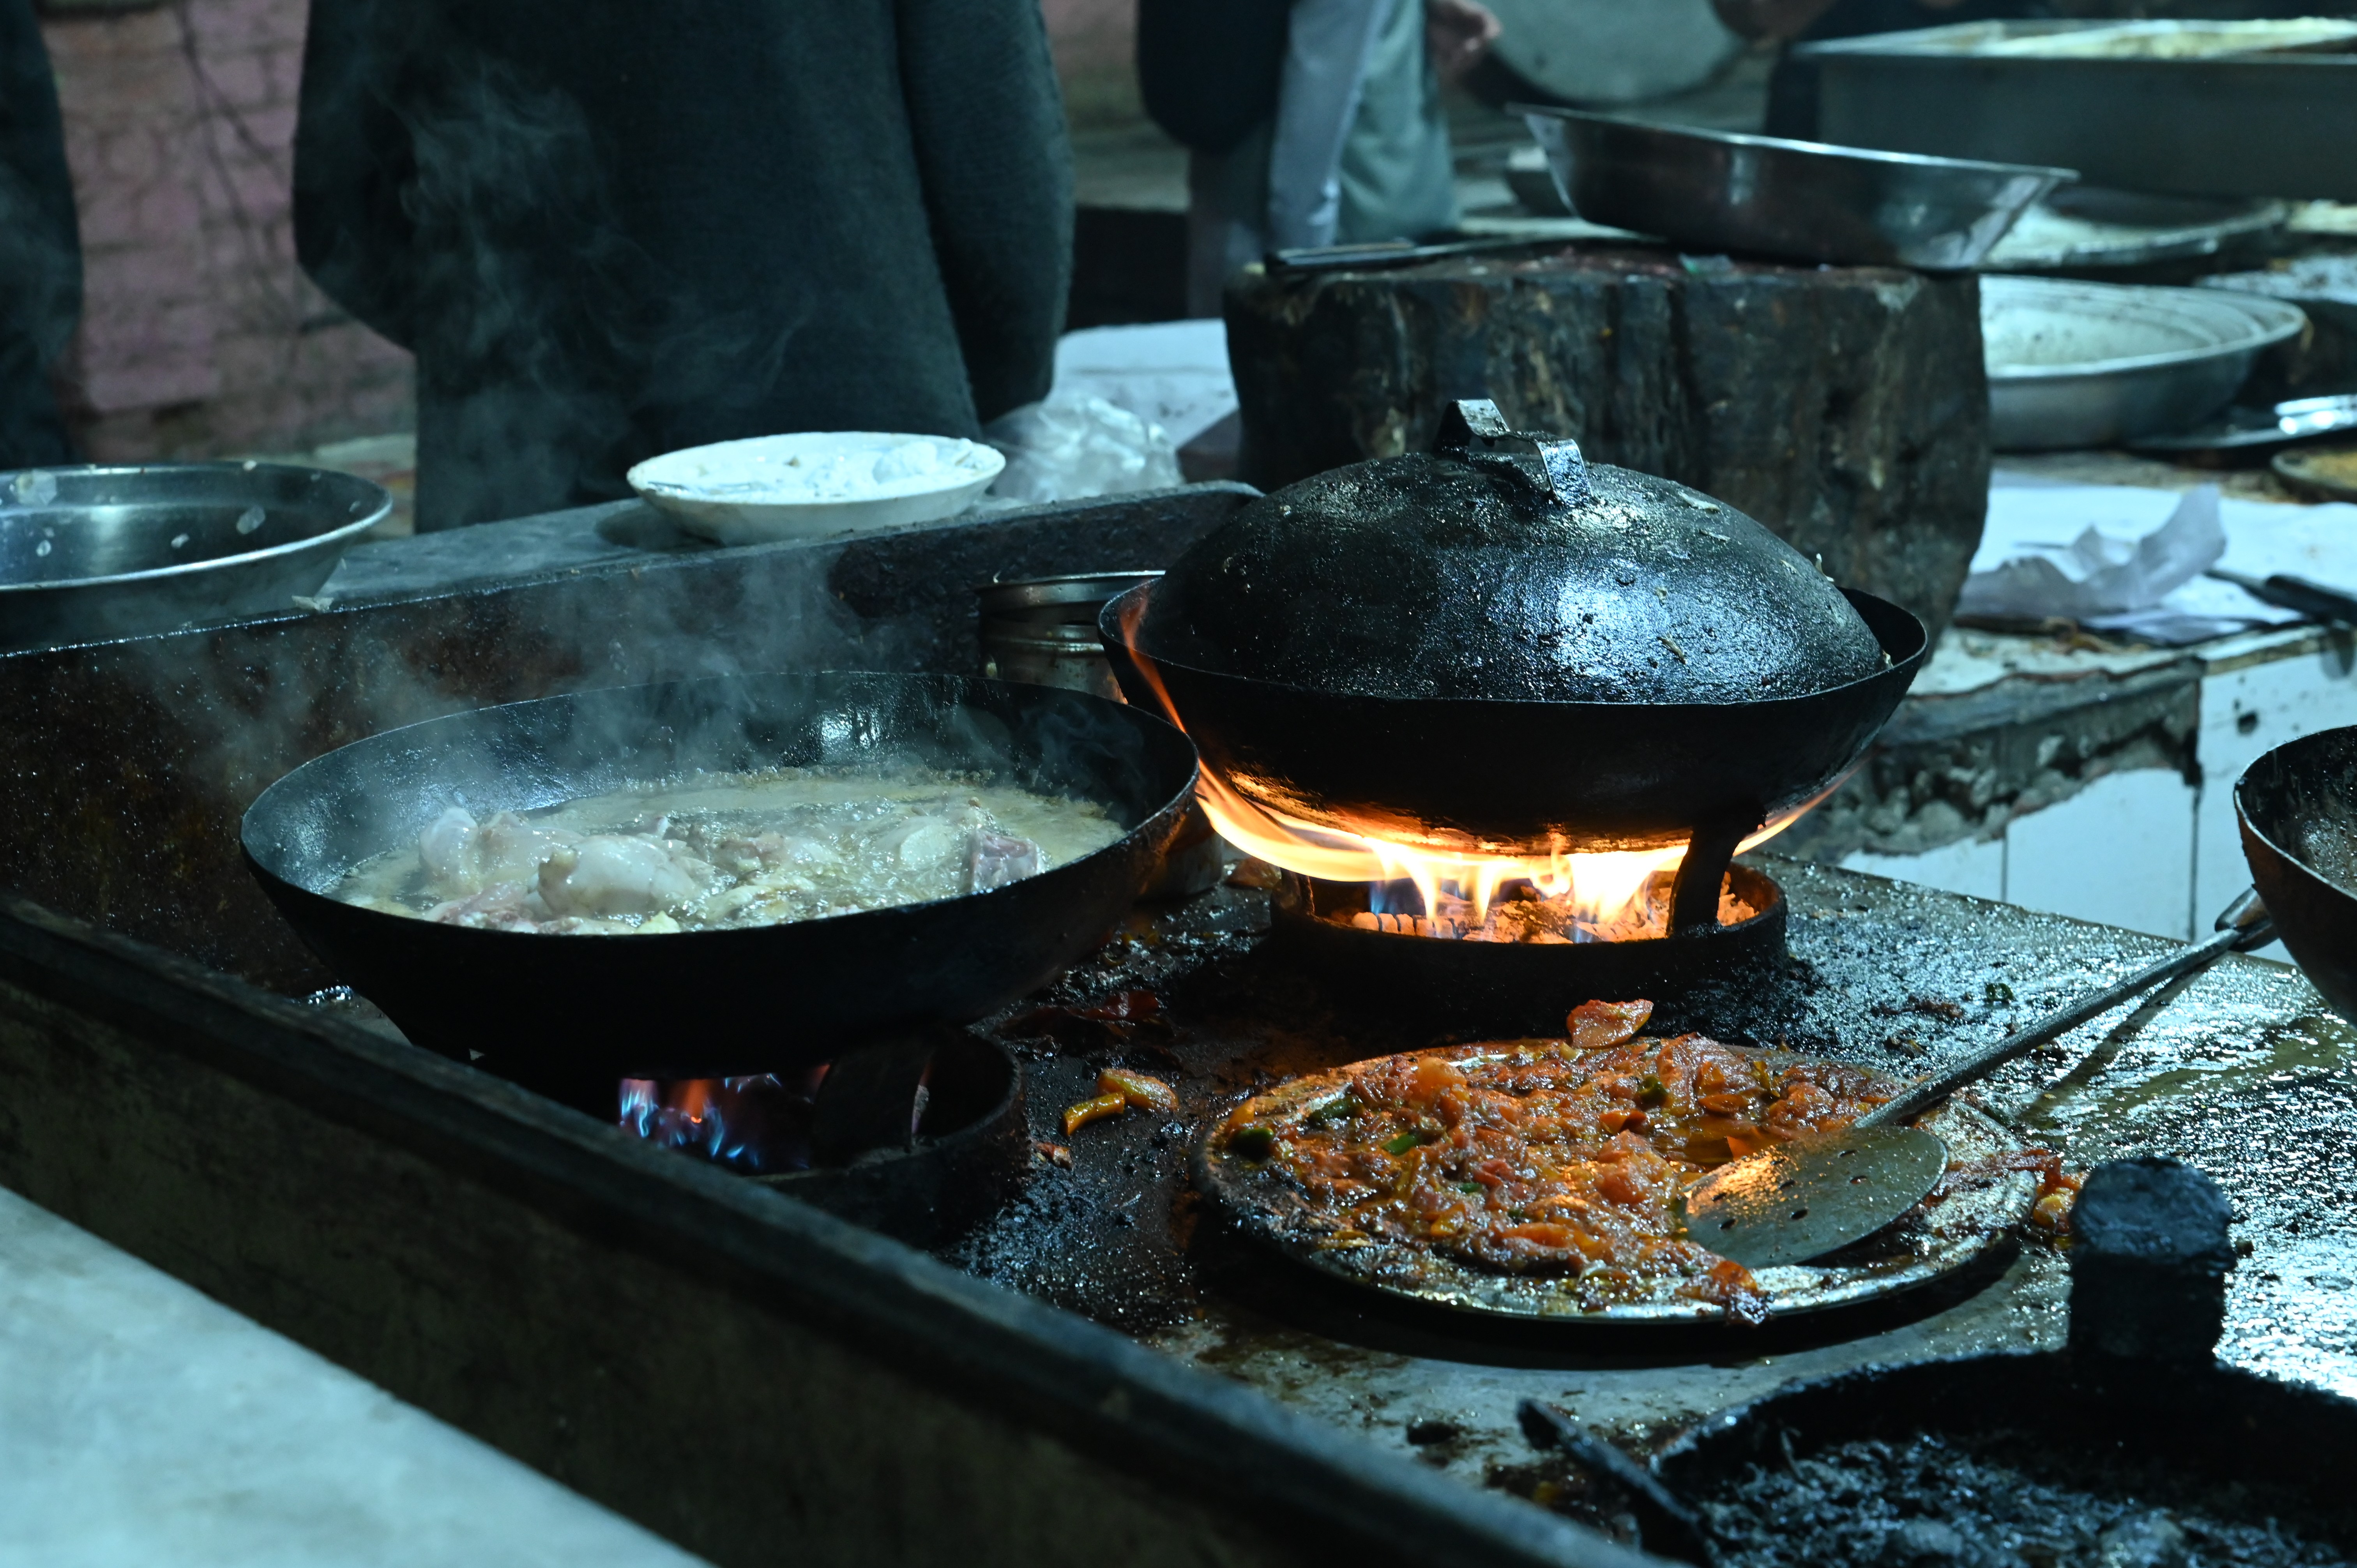 Namkeen Gosht or Salty Meat, the cuisine of the mountain people being cooked at the local restaurant